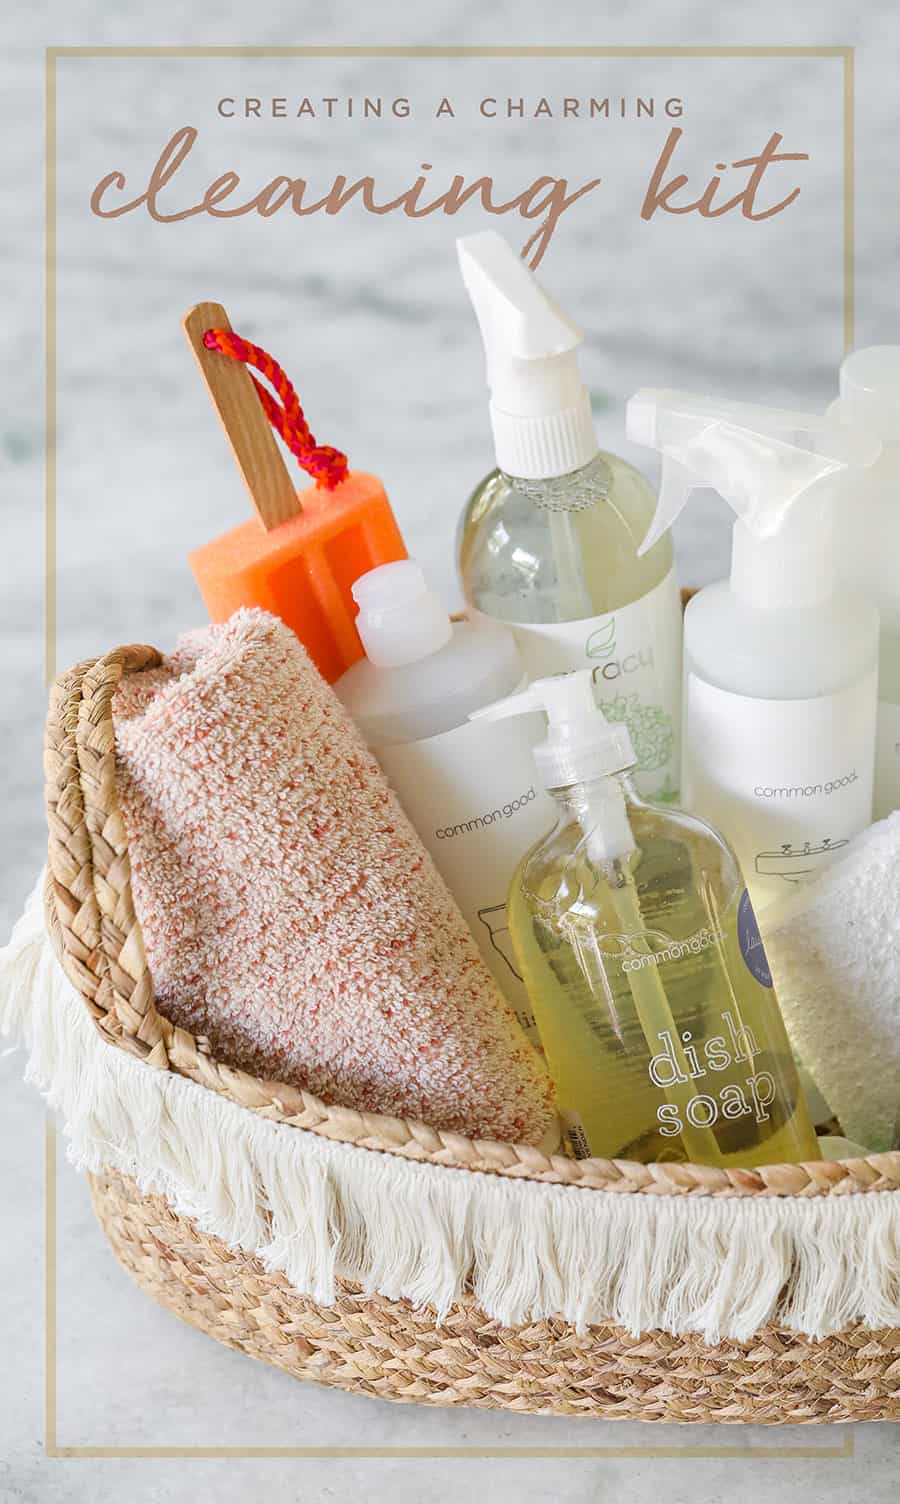 Home Cleaning kit with peach hand towel and basket from Target